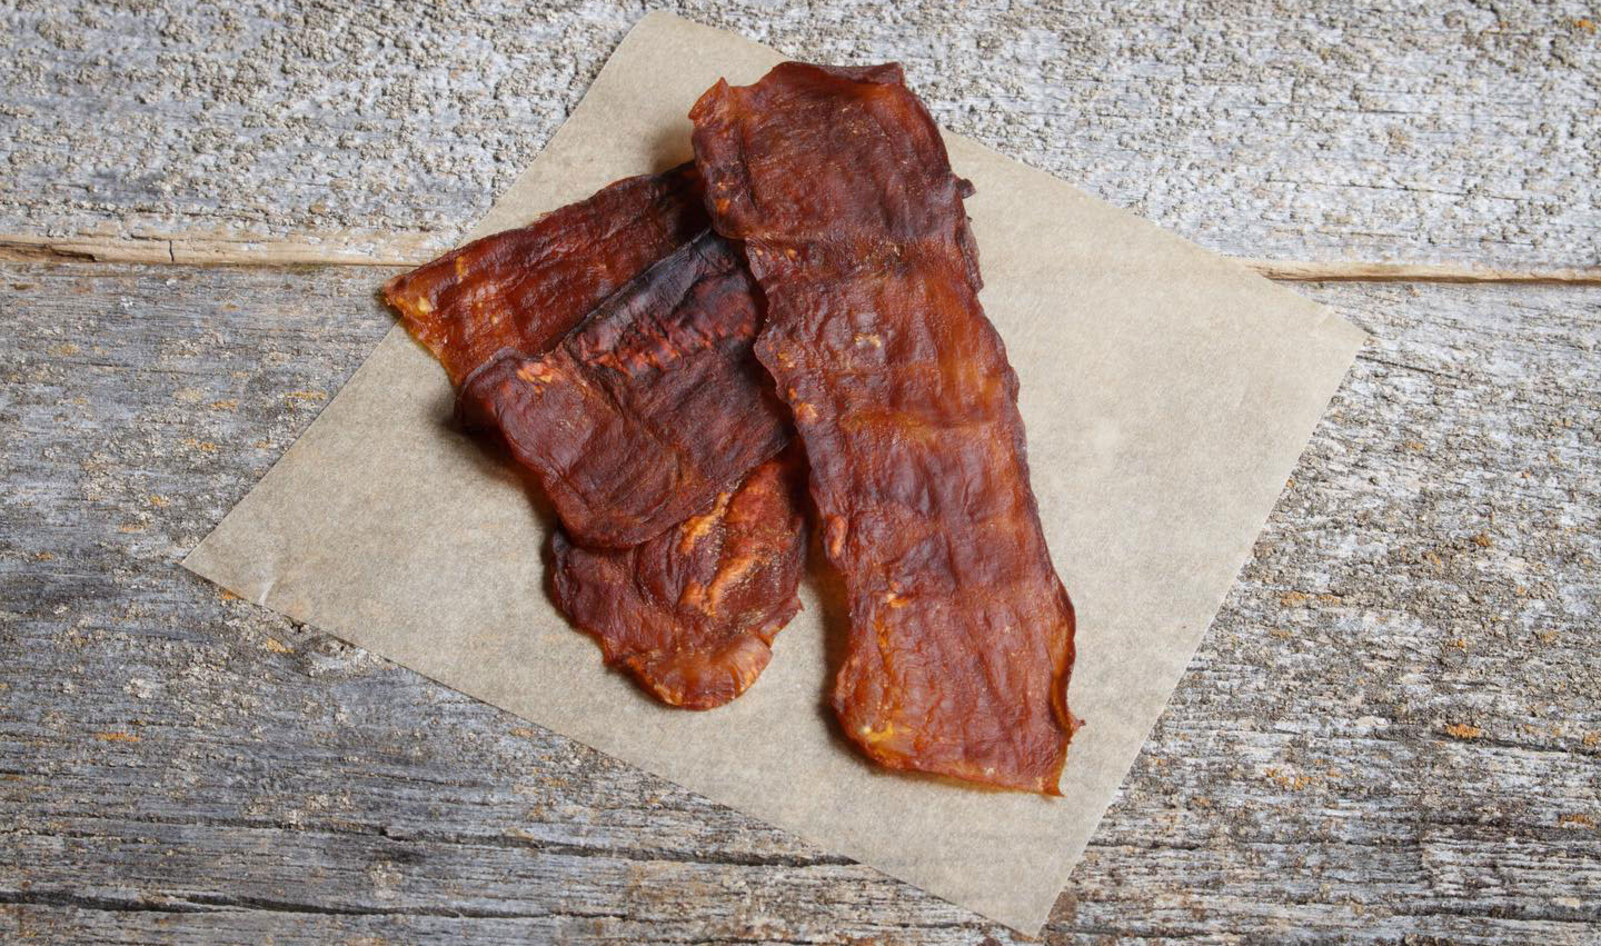 This Startup Just Raised $60 Million to Make Vegan Bacon and Leather from Mushrooms